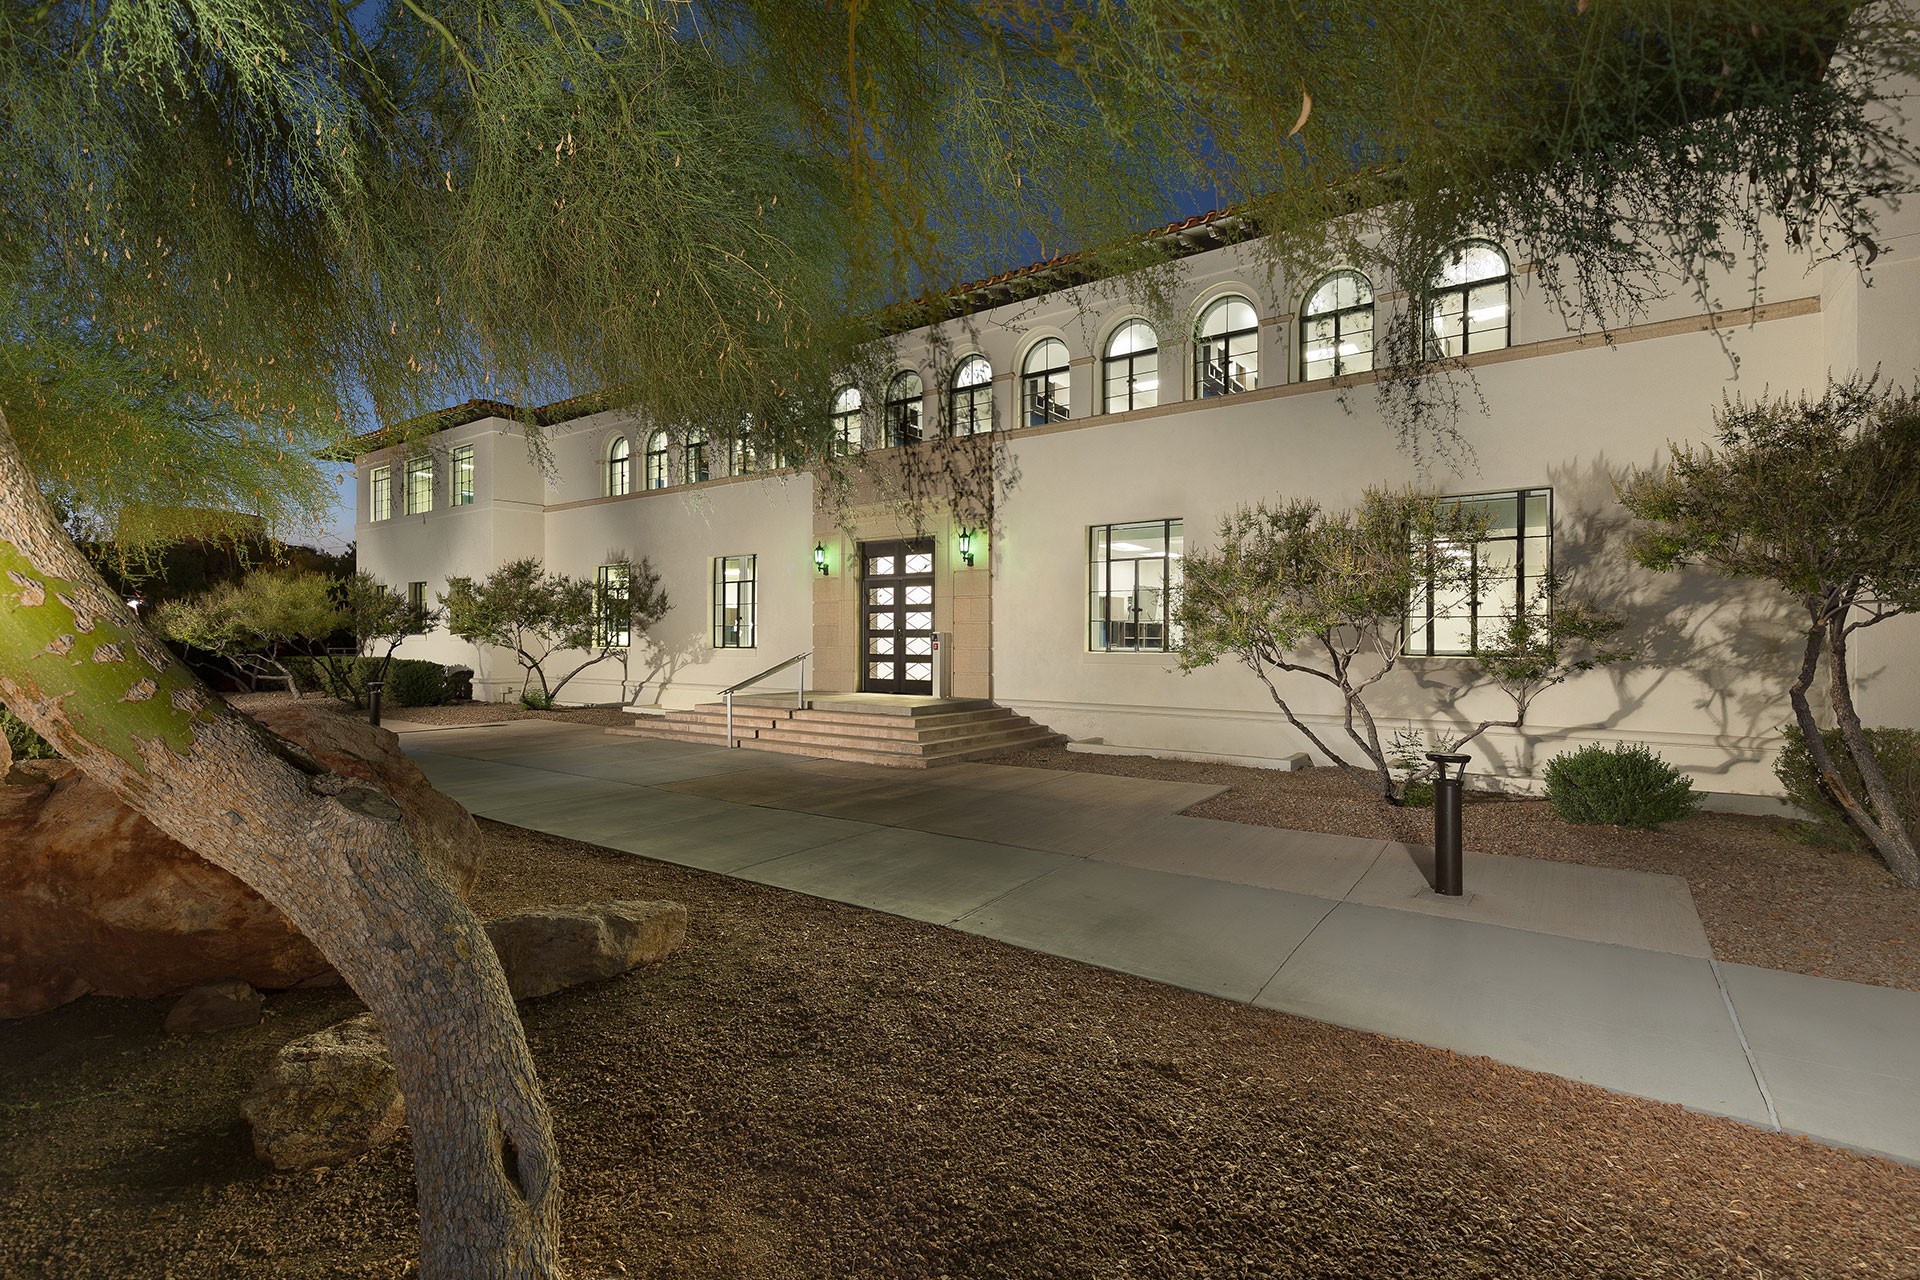 A white stucco two-story building at twilight with abundant windows exposing the interior and steps leading to the entrance like a dias with a mesquite tree in the foreground and desert landscaping about.